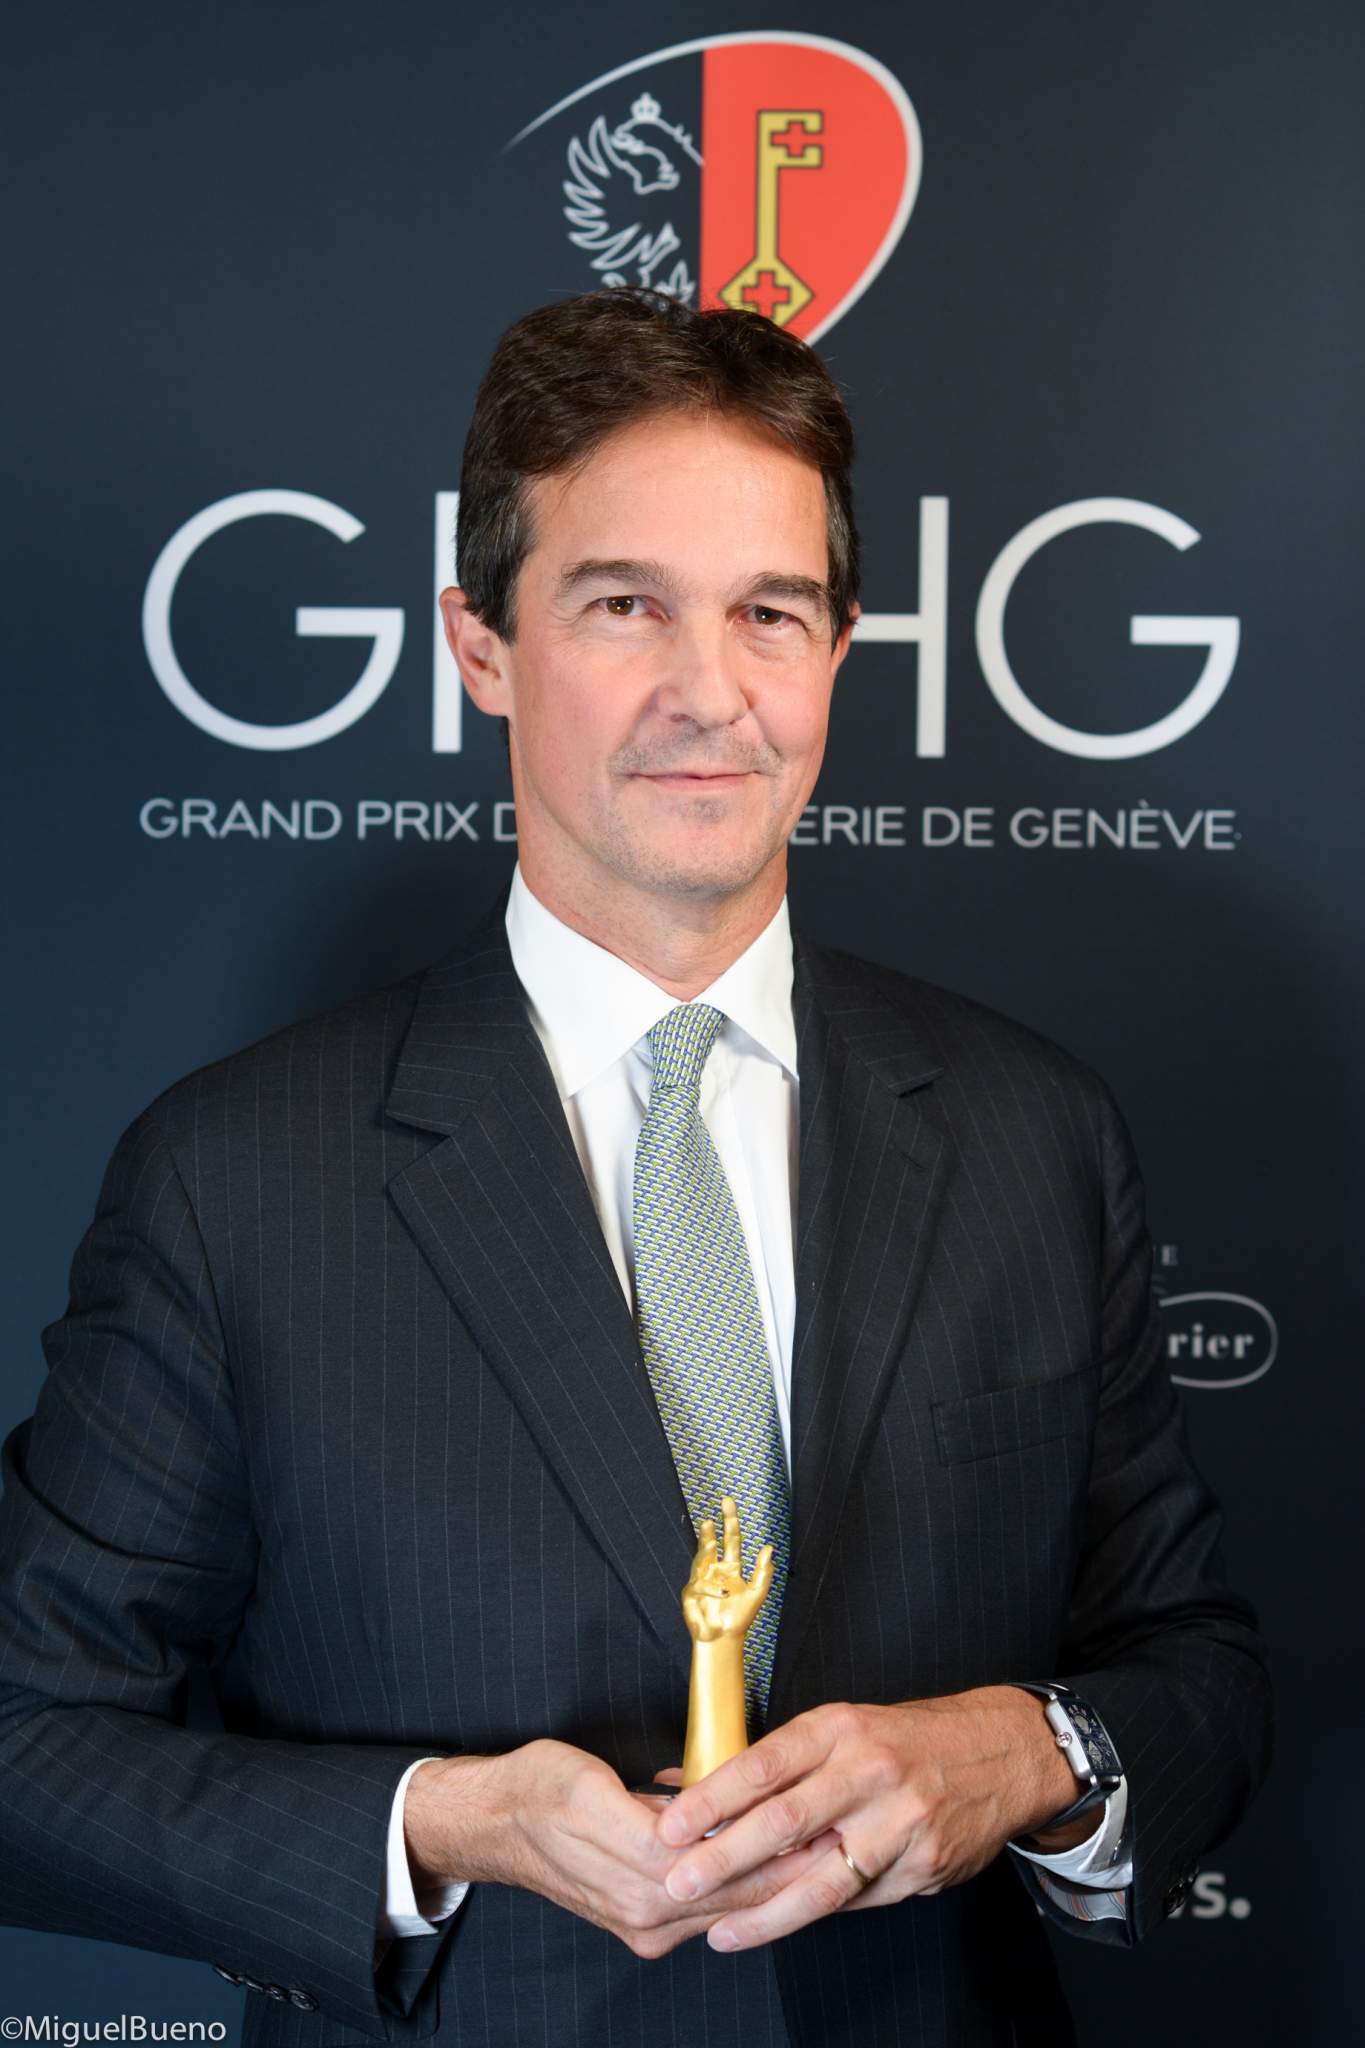 CEO of Hermès Horloger, winner of the Calendar and Astronomy Watch Prize 2019